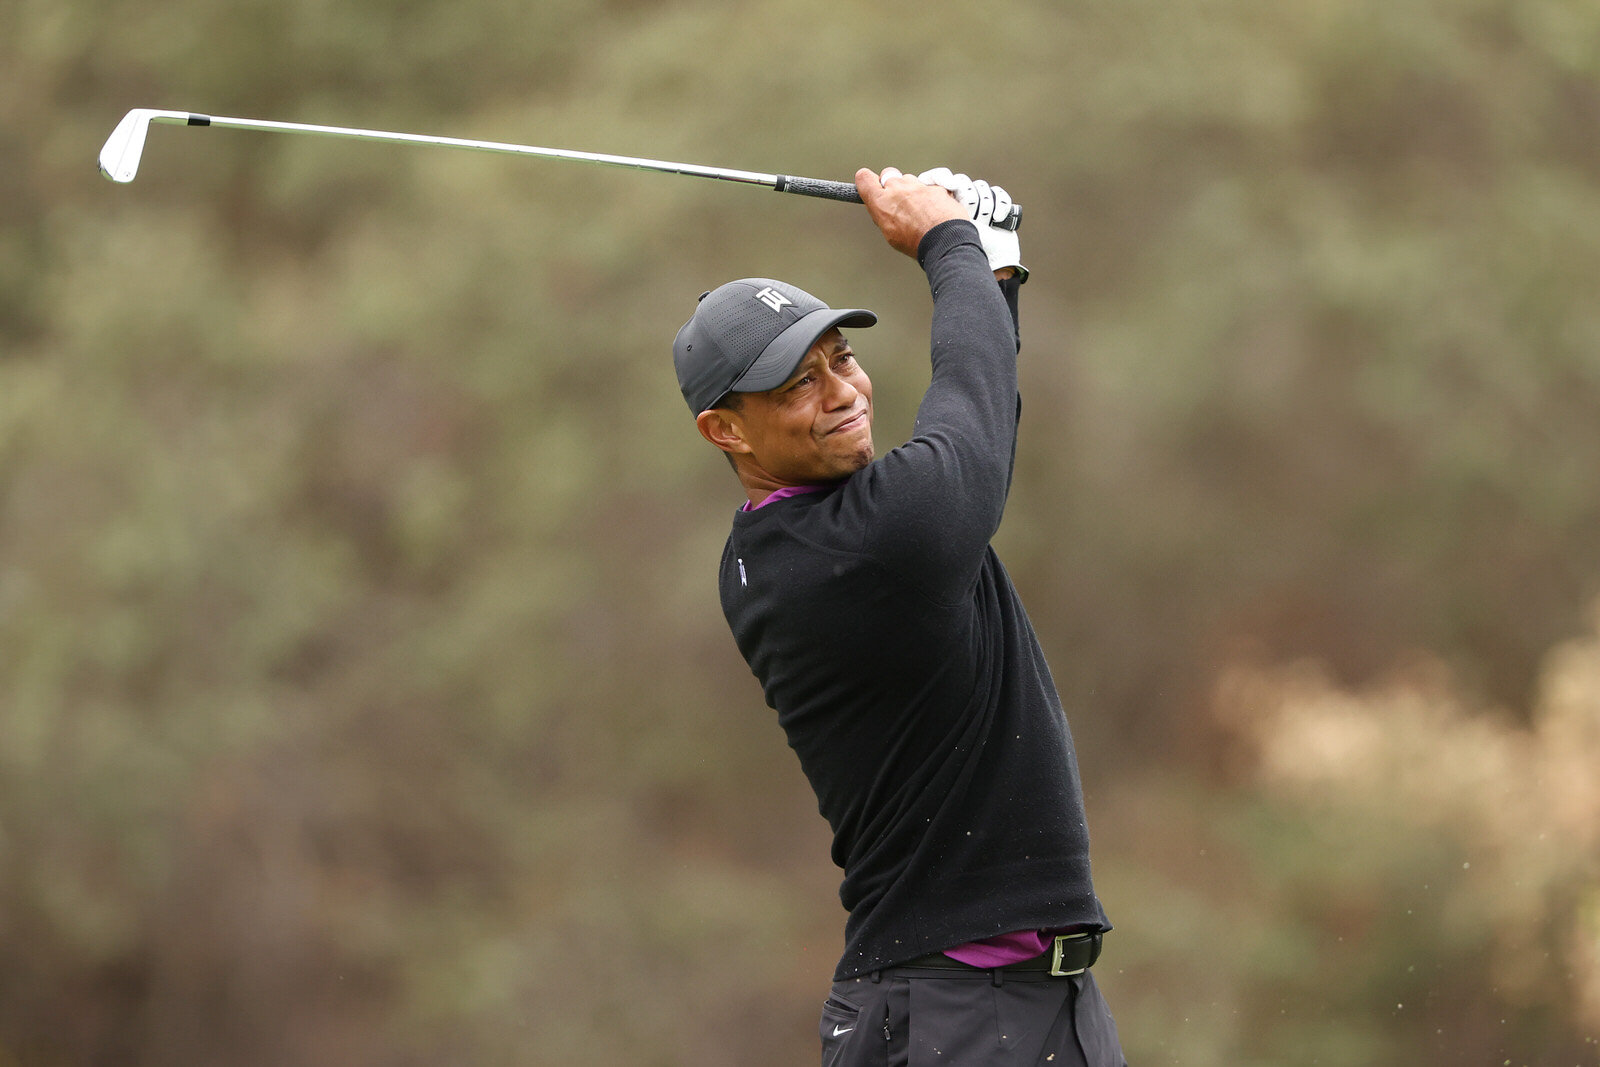  THOUSAND OAKS, CALIFORNIA - OCTOBER 23:  Tiger Woods of the United States plays his shot from the ninth tee during the second round of the Zozo Championship @ Sherwood on October 23, 2020 in Thousand Oaks, California. (Photo by Ezra Shaw/Getty Image